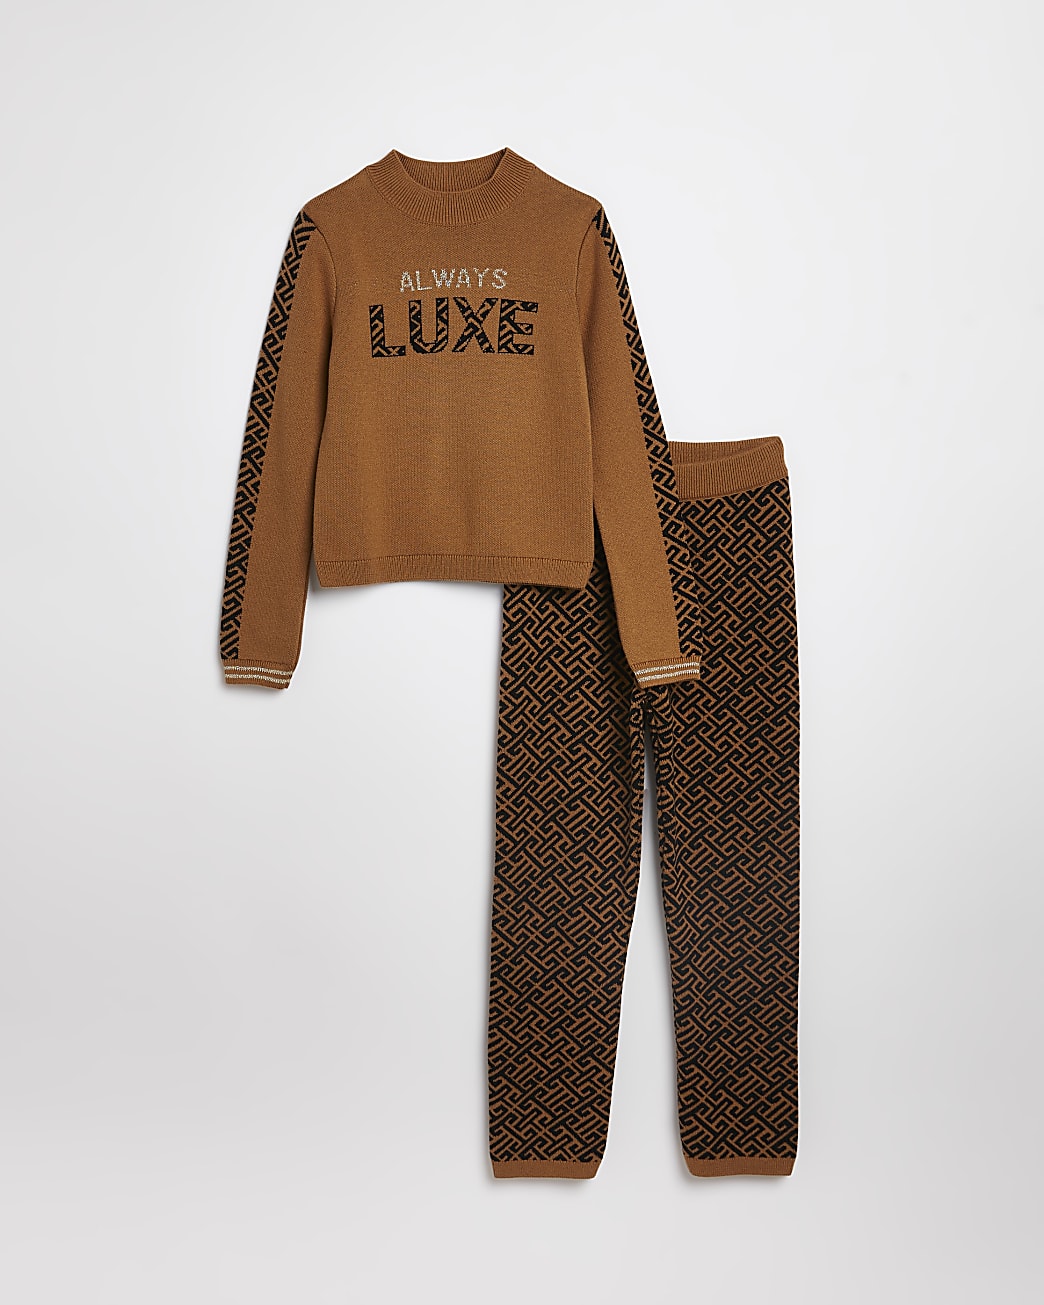 Girls brown knit monogram jumper outfit